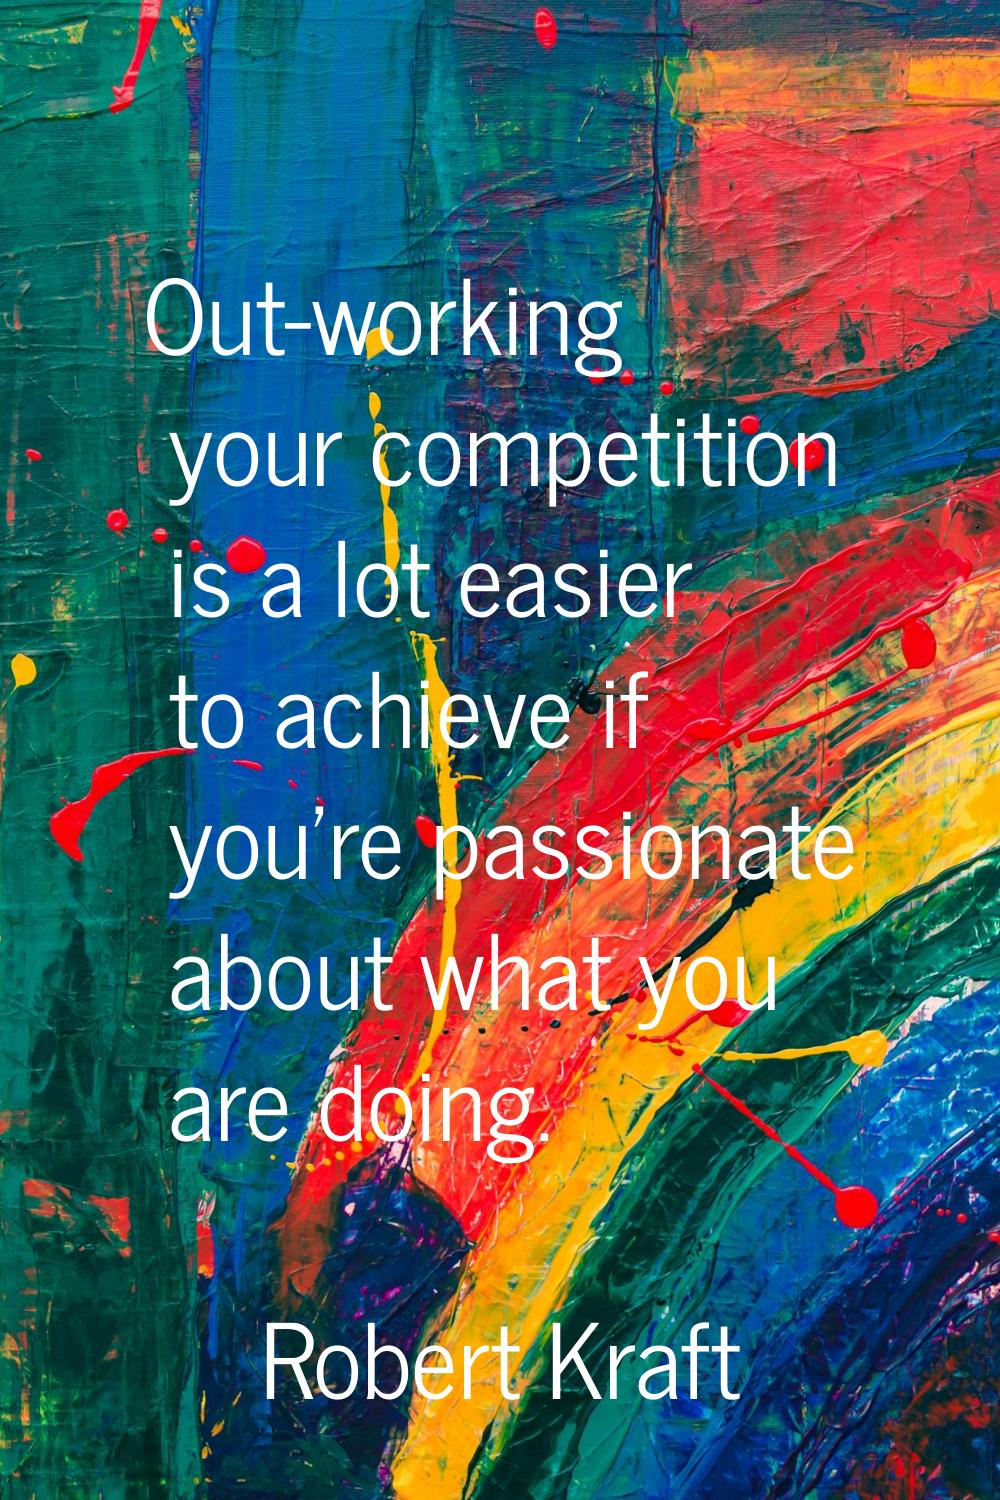 Out-working your competition is a lot easier to achieve if you're passionate about what you are doi